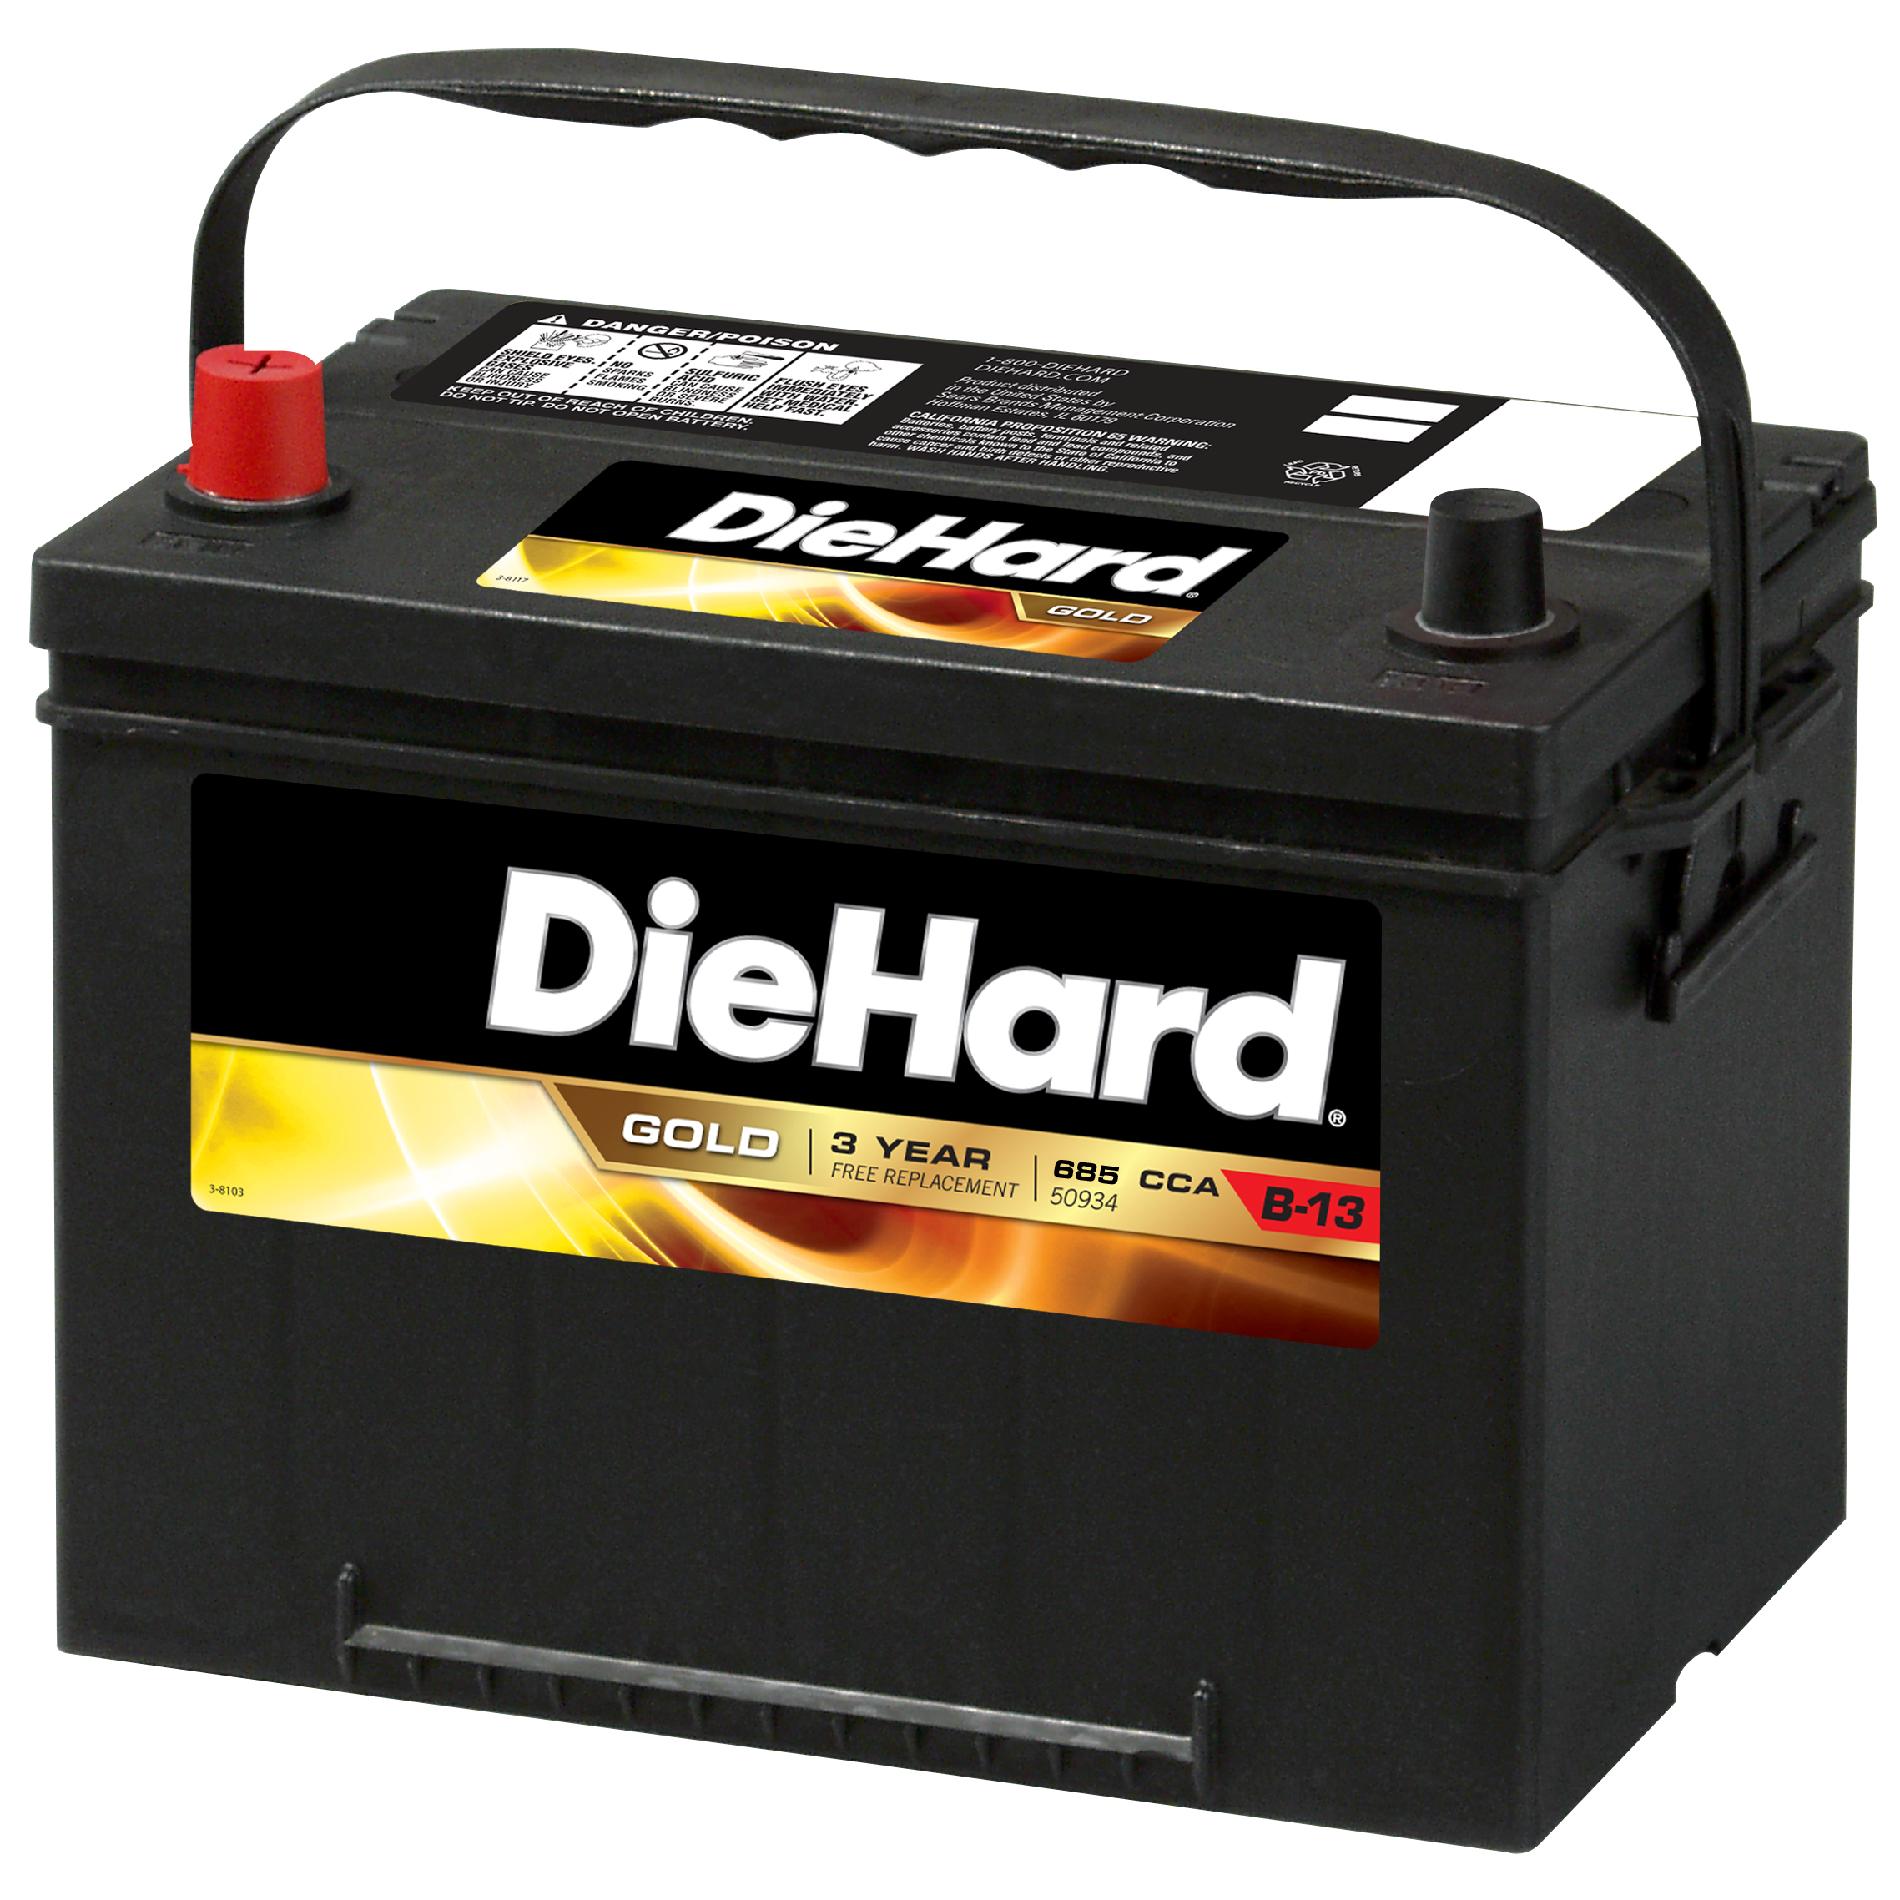 DieHard Gold Automotive Battery - Group Size EP-34 (Price with Exchange)